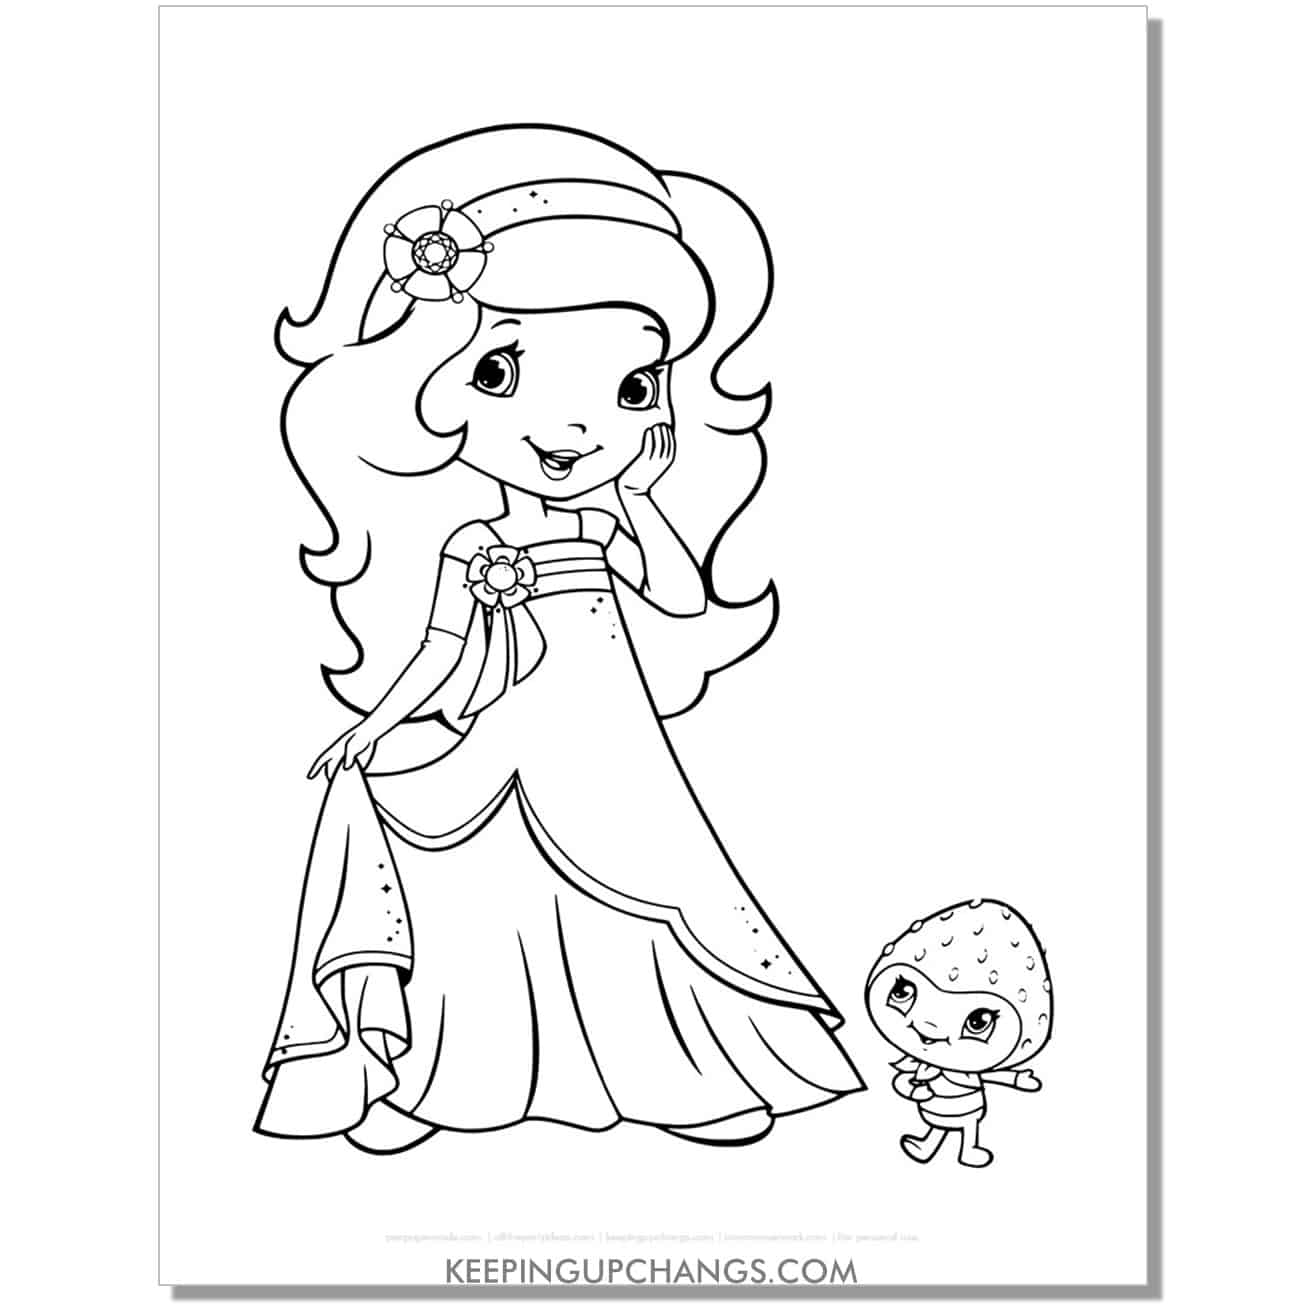 free orange blossom with baby strawberry shortcake coloring page, sheet.